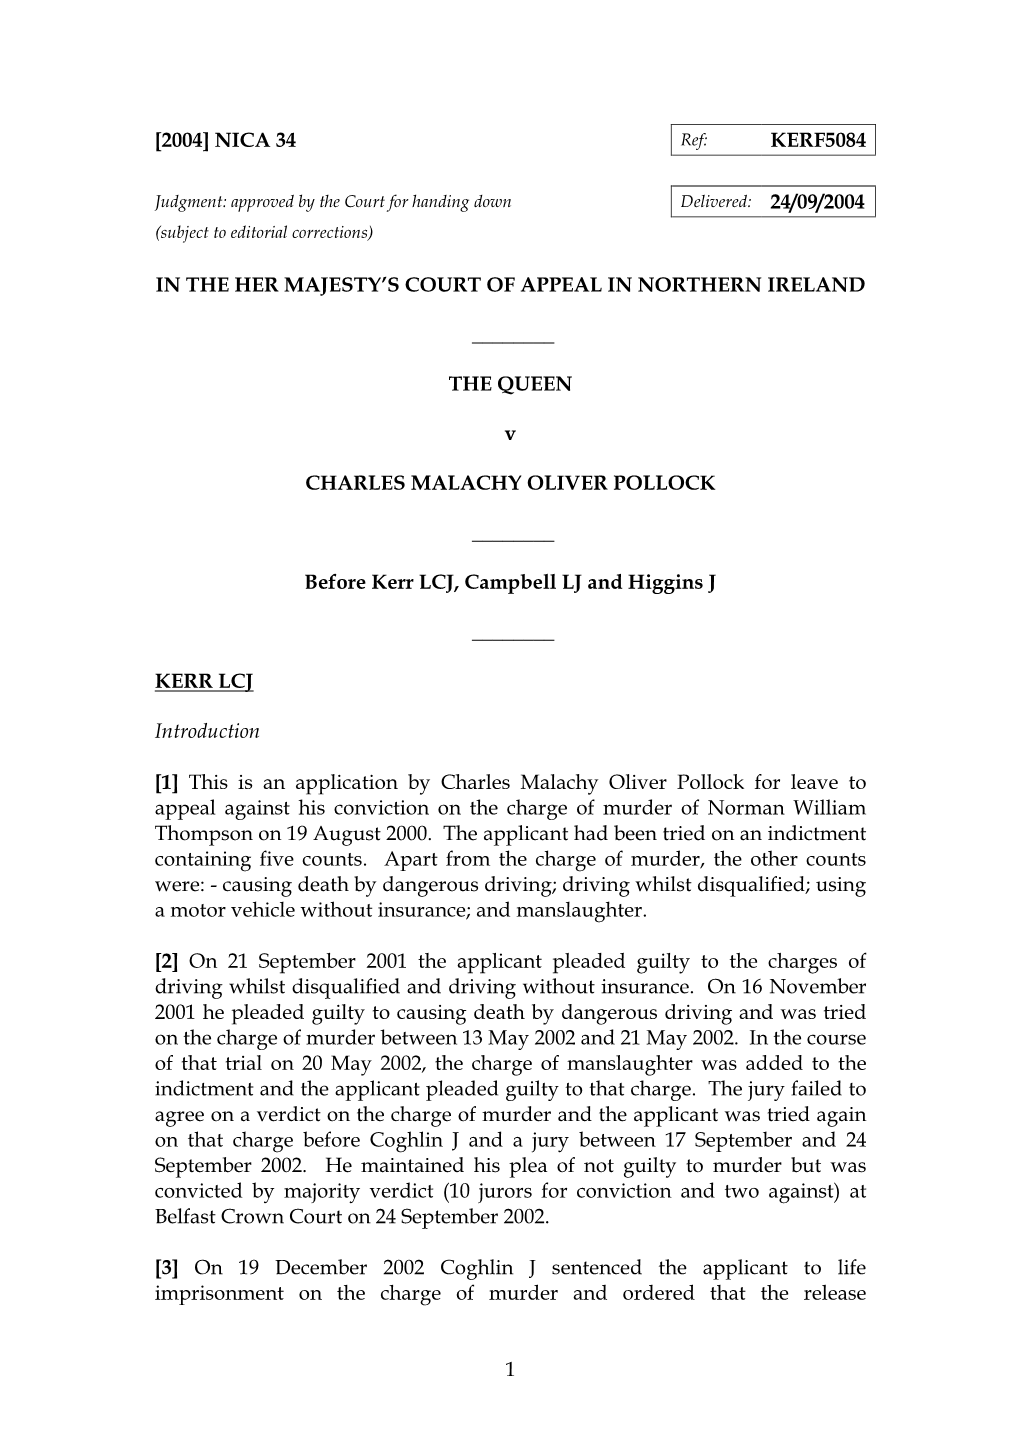 1 [2004] NICA 34 KERF5084 in the HER MAJESTY's COURT of APPEAL in NORTHERN IRELAND ___THE QUEEN V CHARLES MALACHY OLIVER